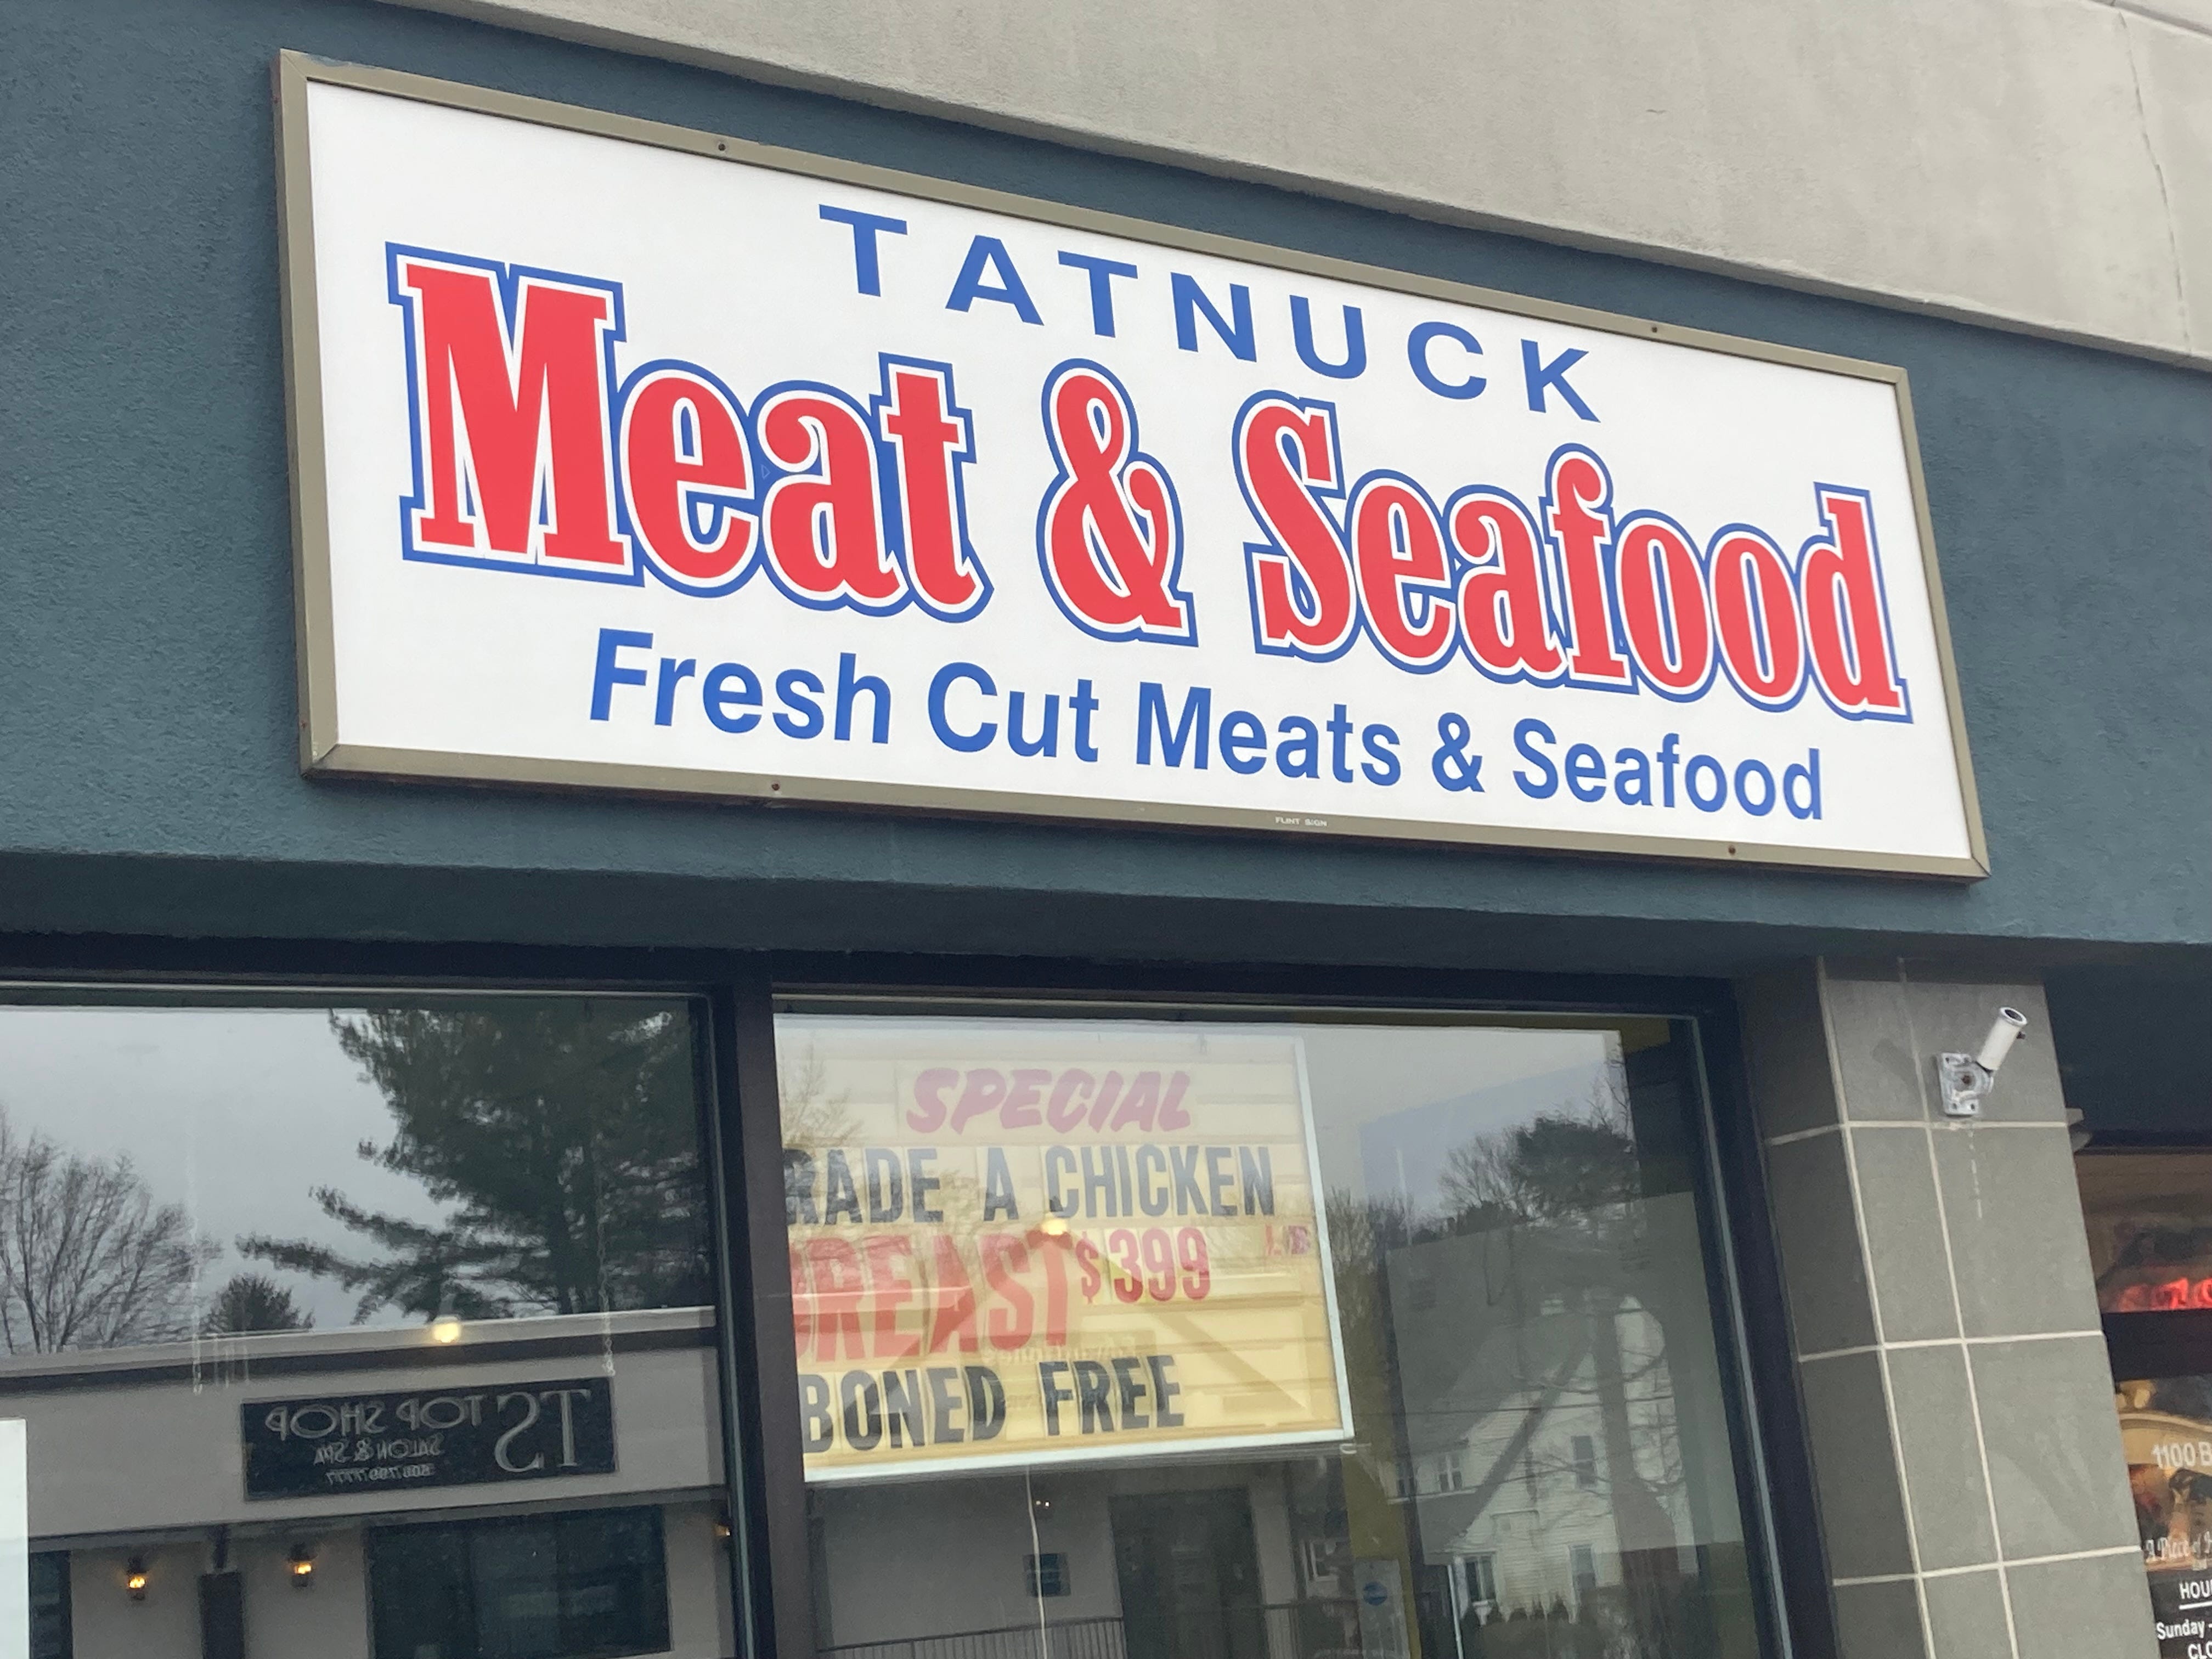 Tatnuck Meat & Seafood shuts its doors in Worcester after half a century